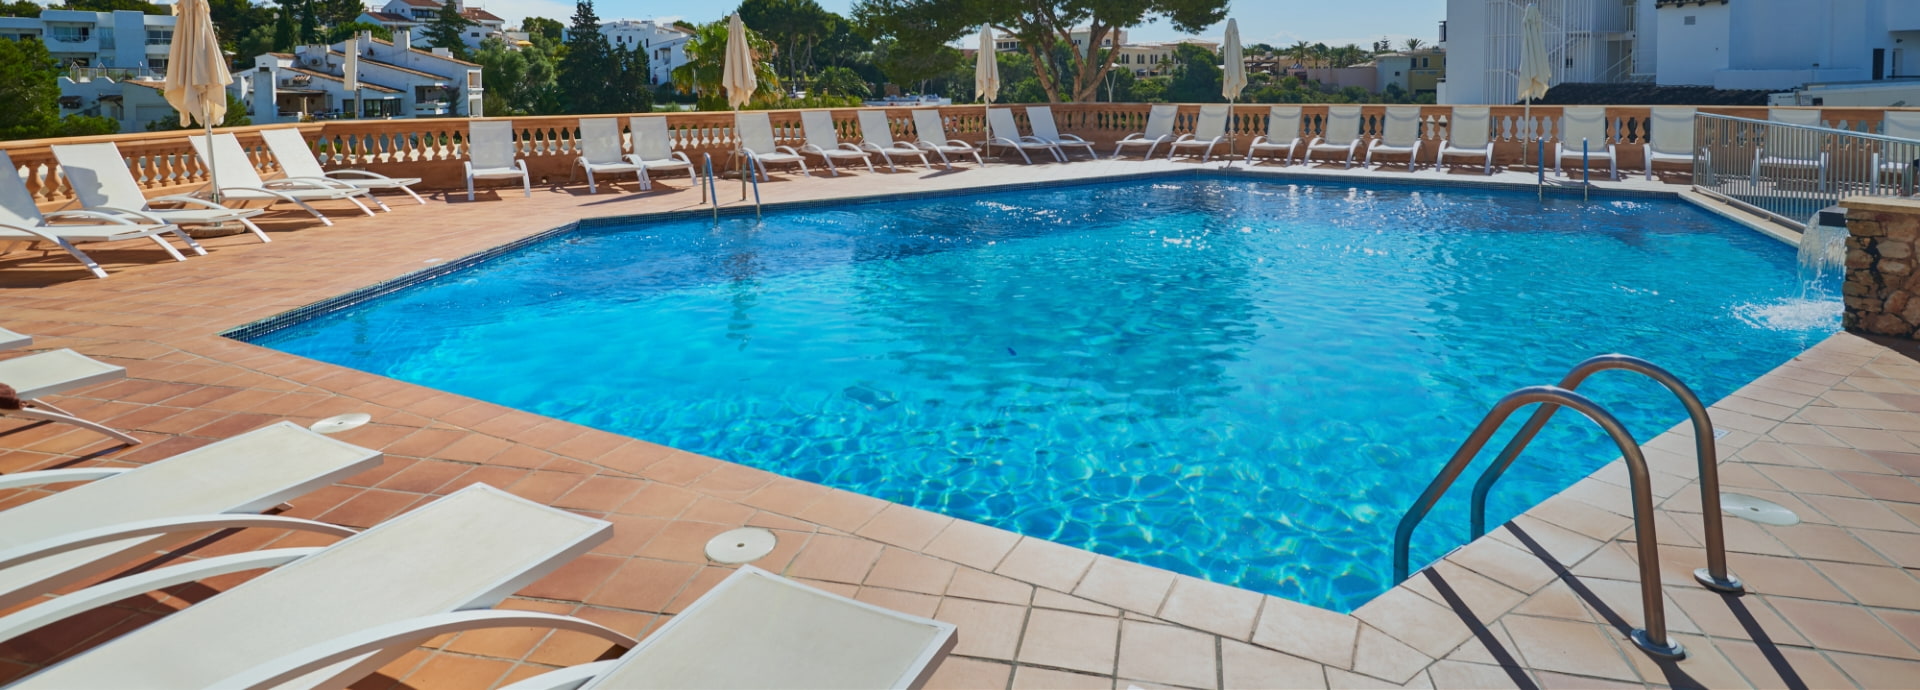 Outdoor swimming pool of the apartments